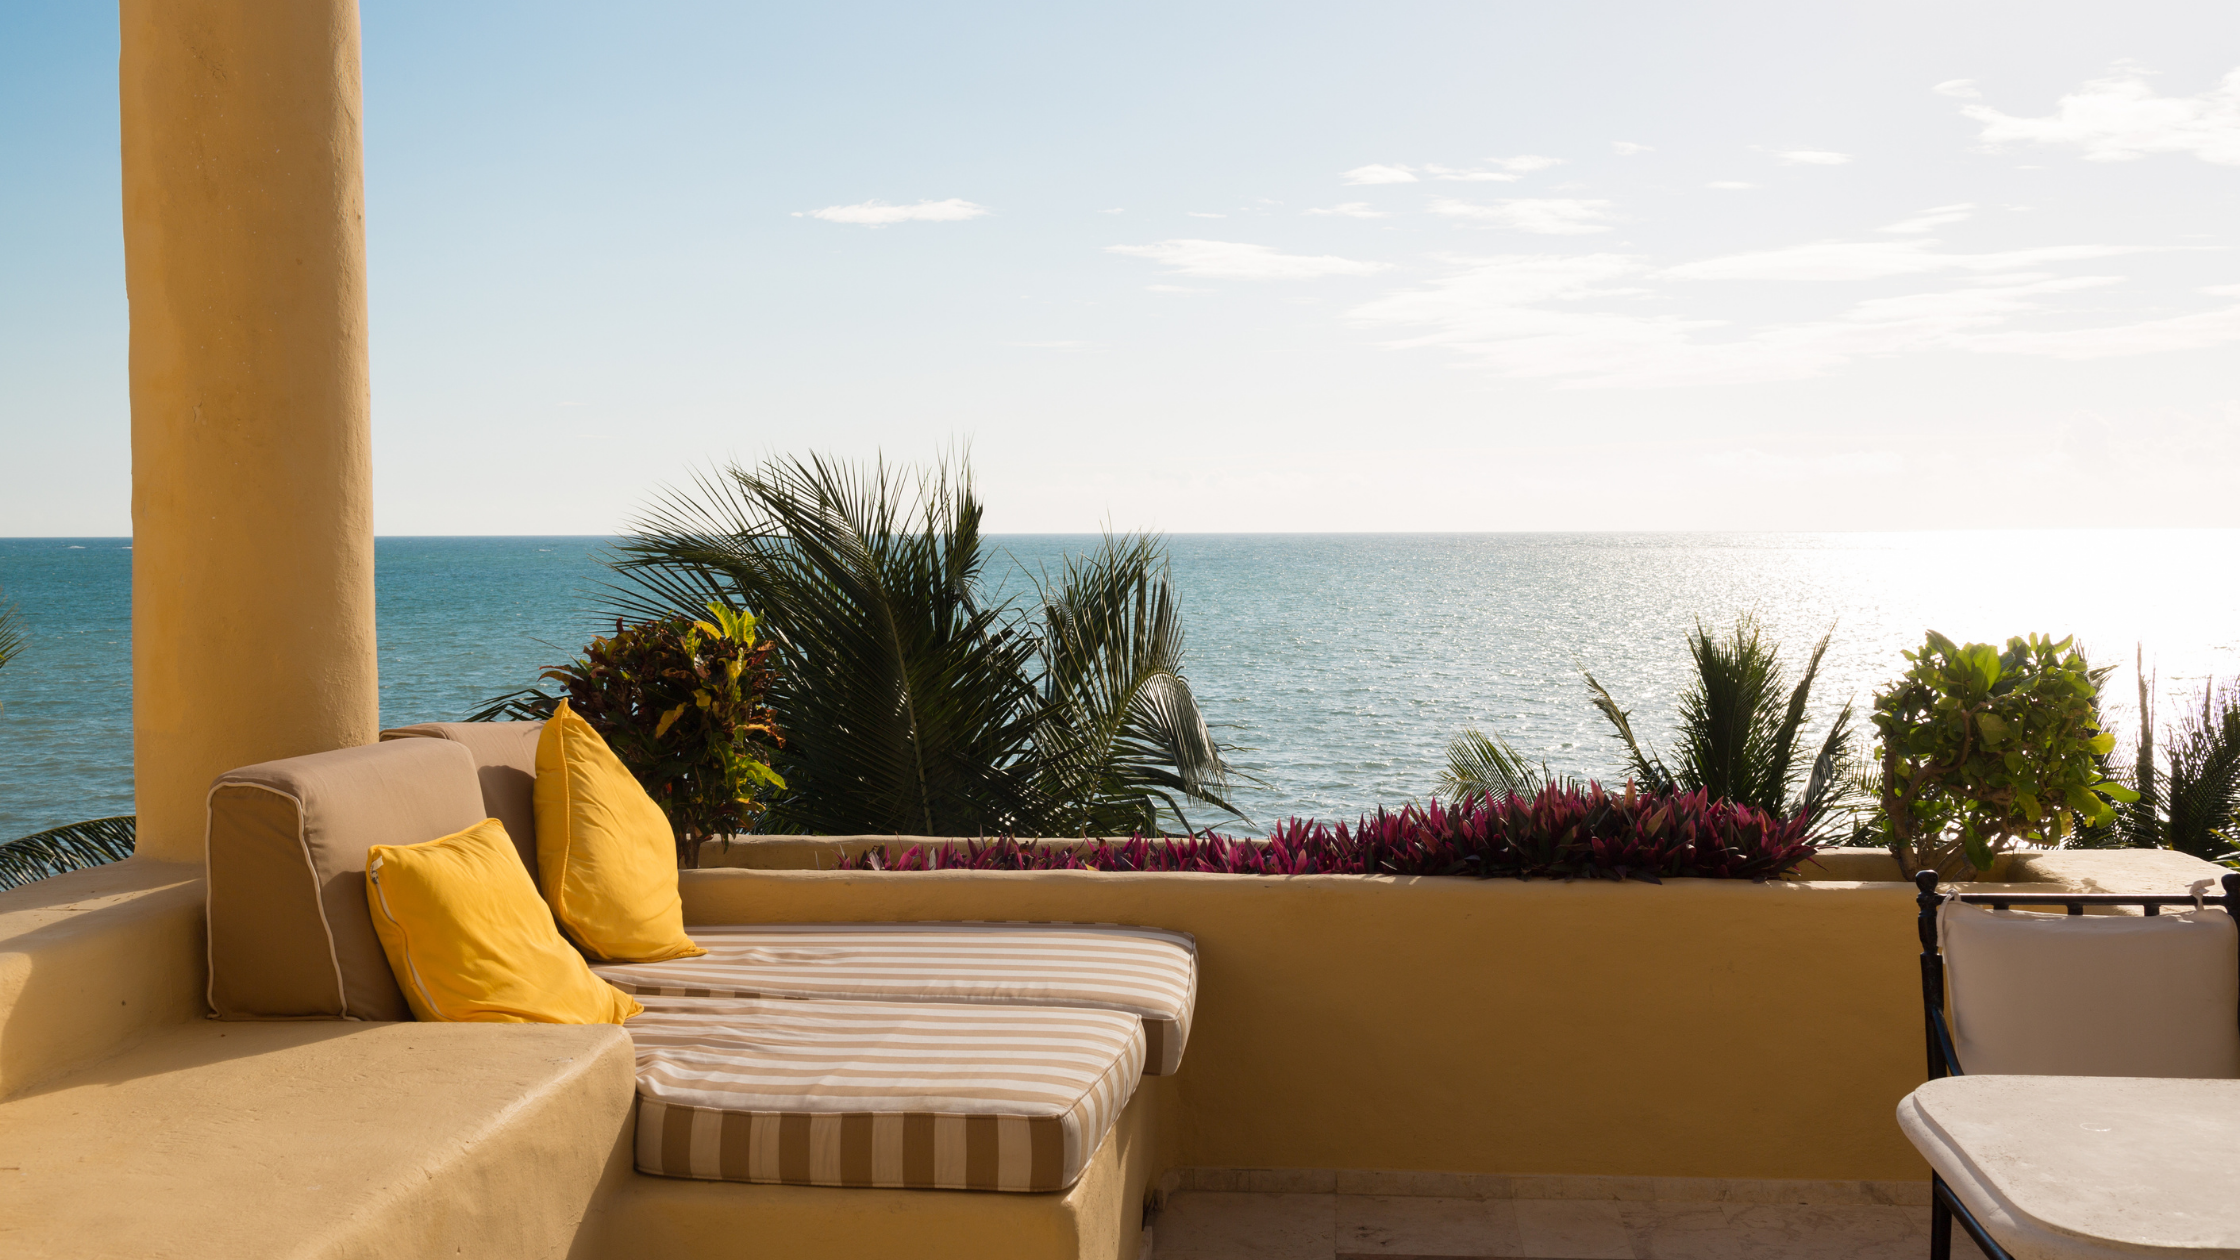 What You Need to Know about Buying a Vacation Home